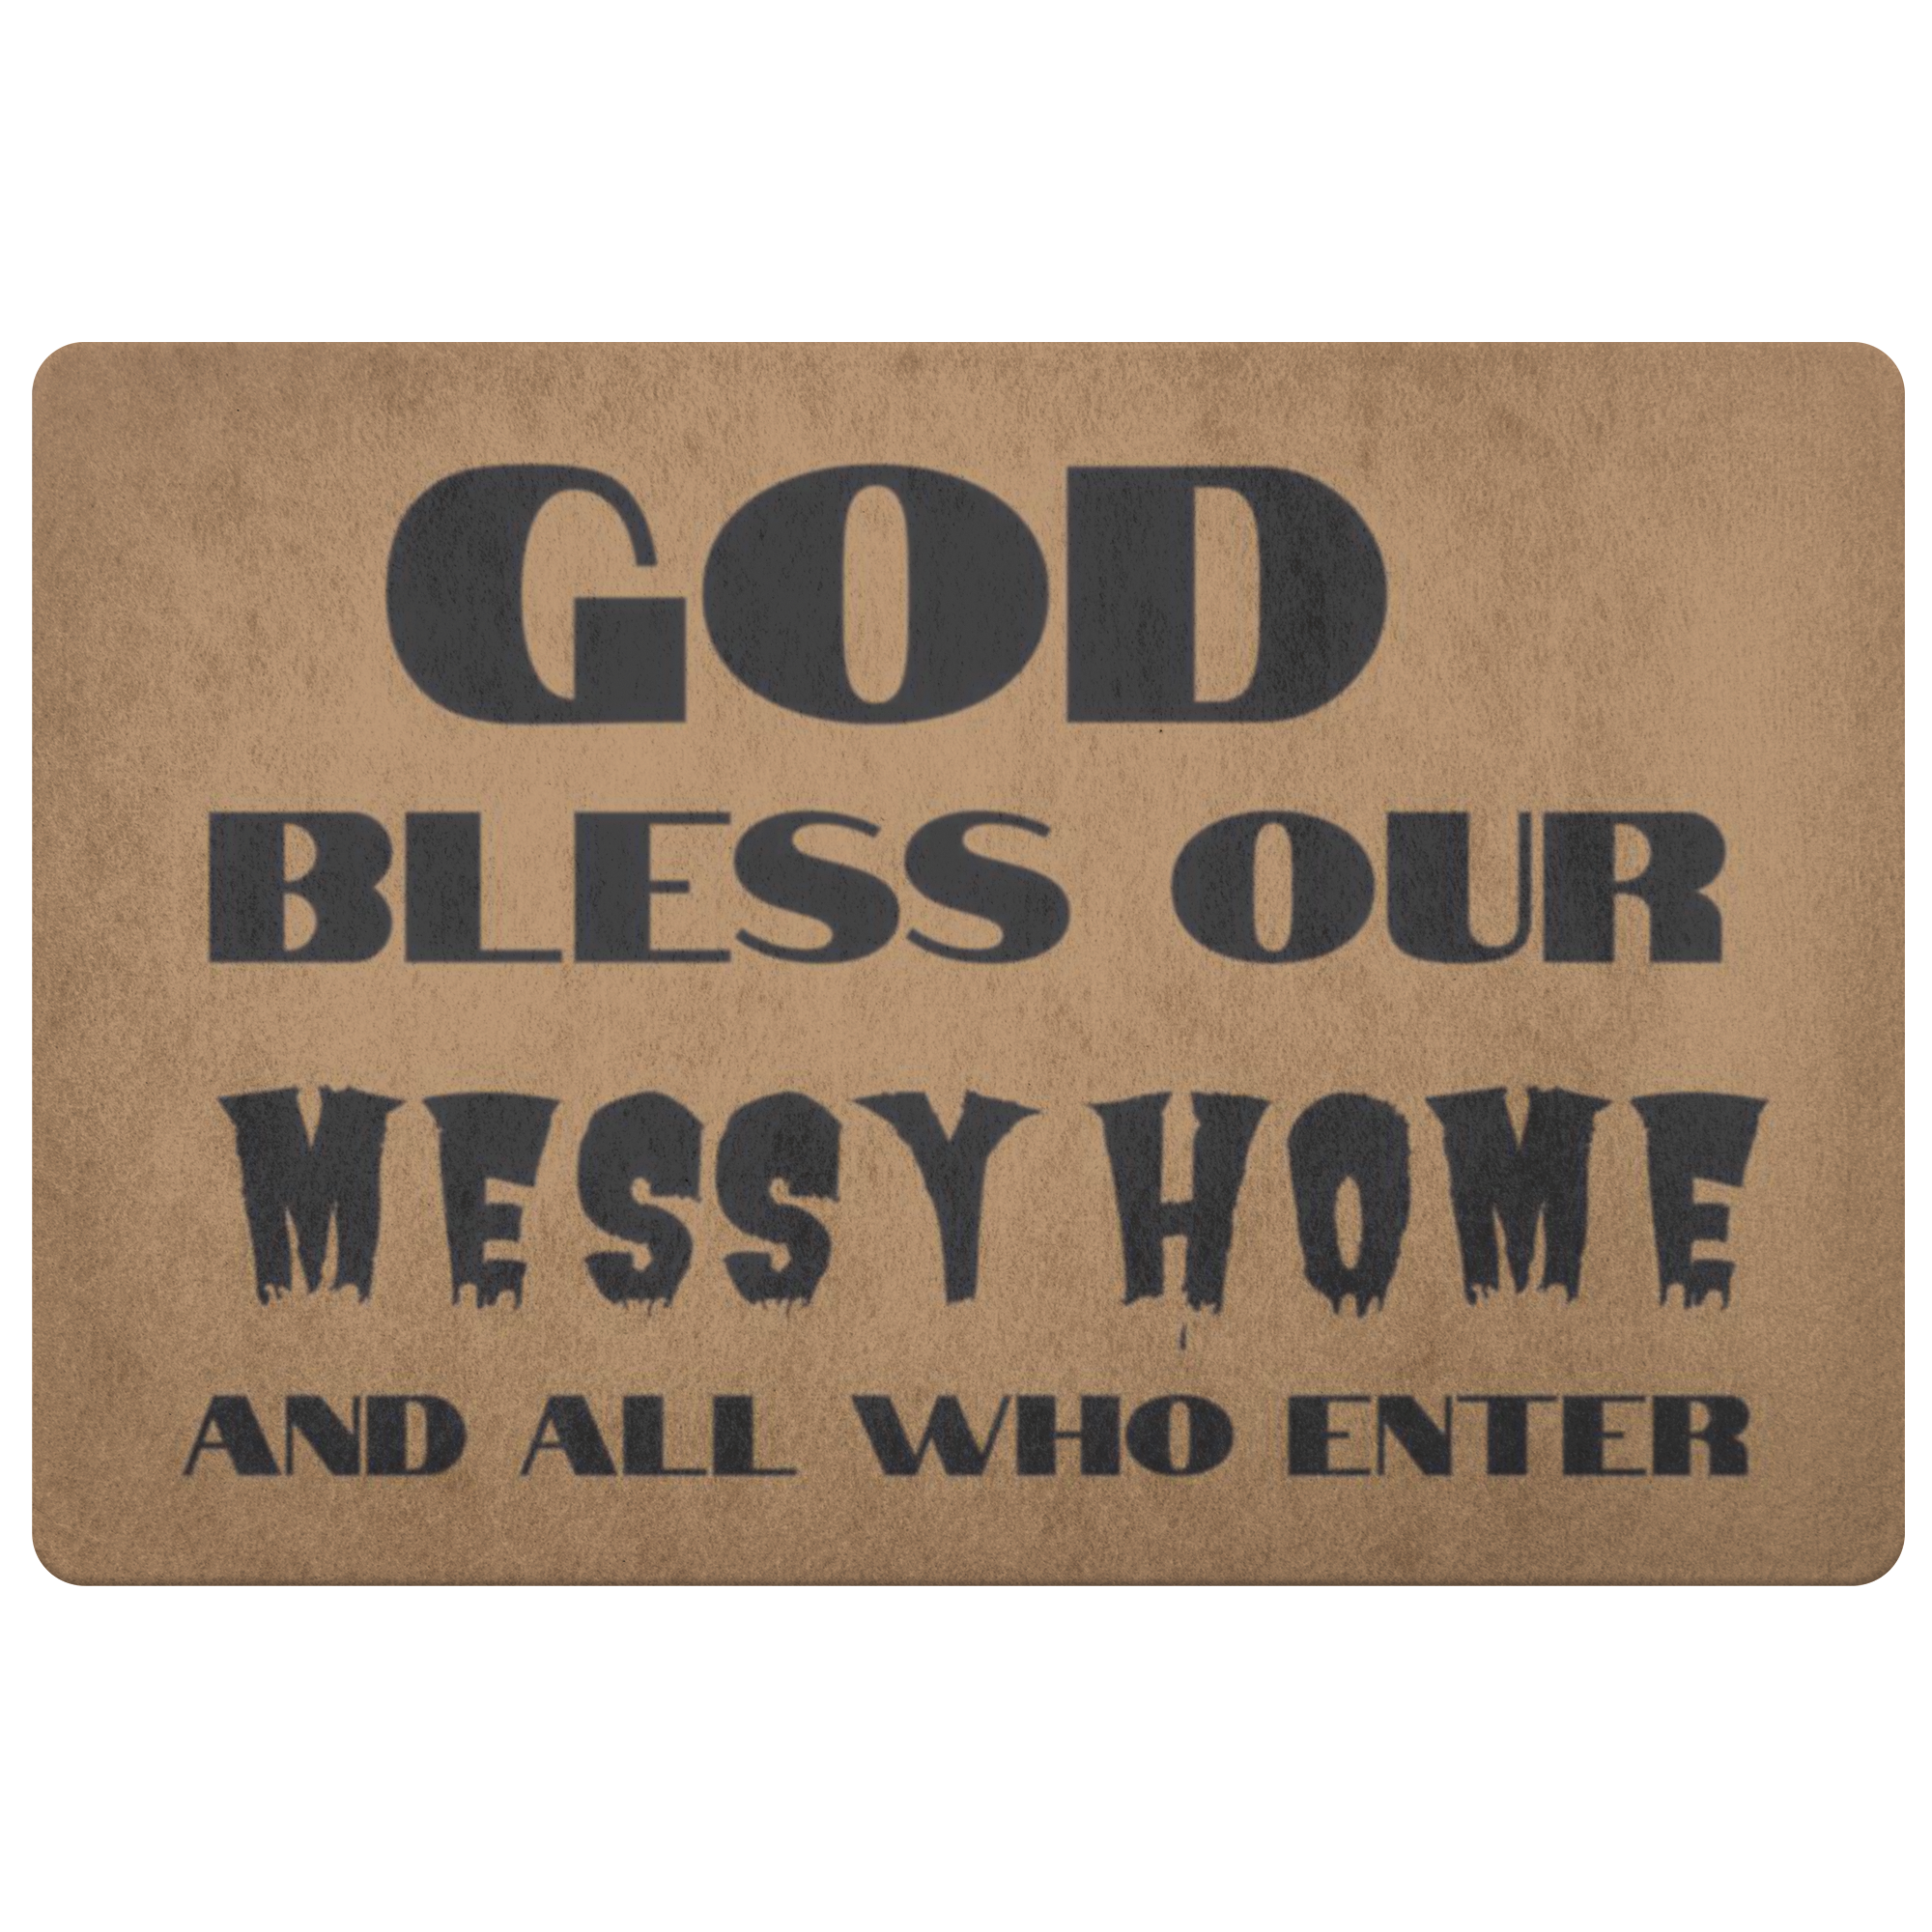 God bless our messy home and all who enter doormat